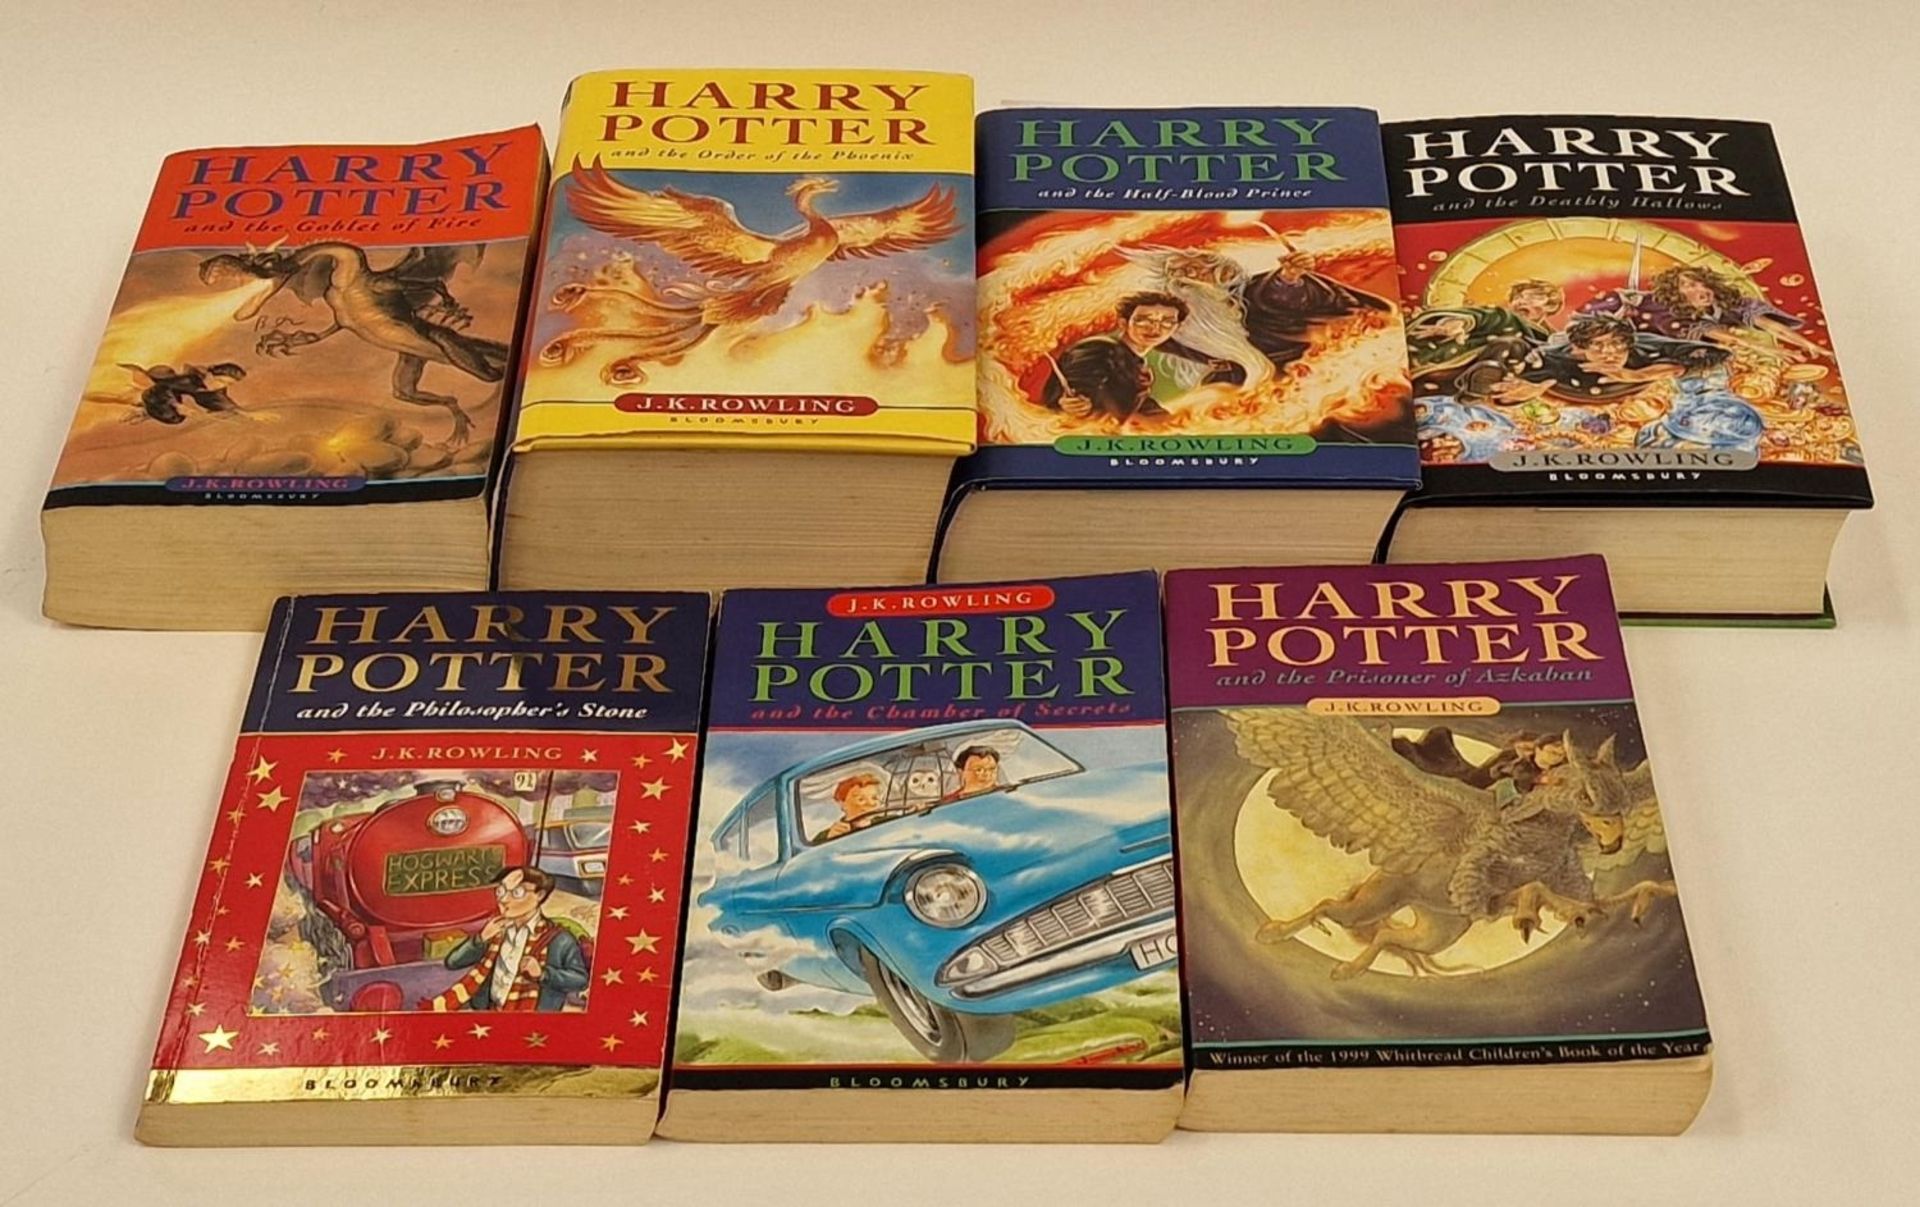 Complete set of J.K. Rowling Harry Potter books volumes 1-7. Three most recent books are first